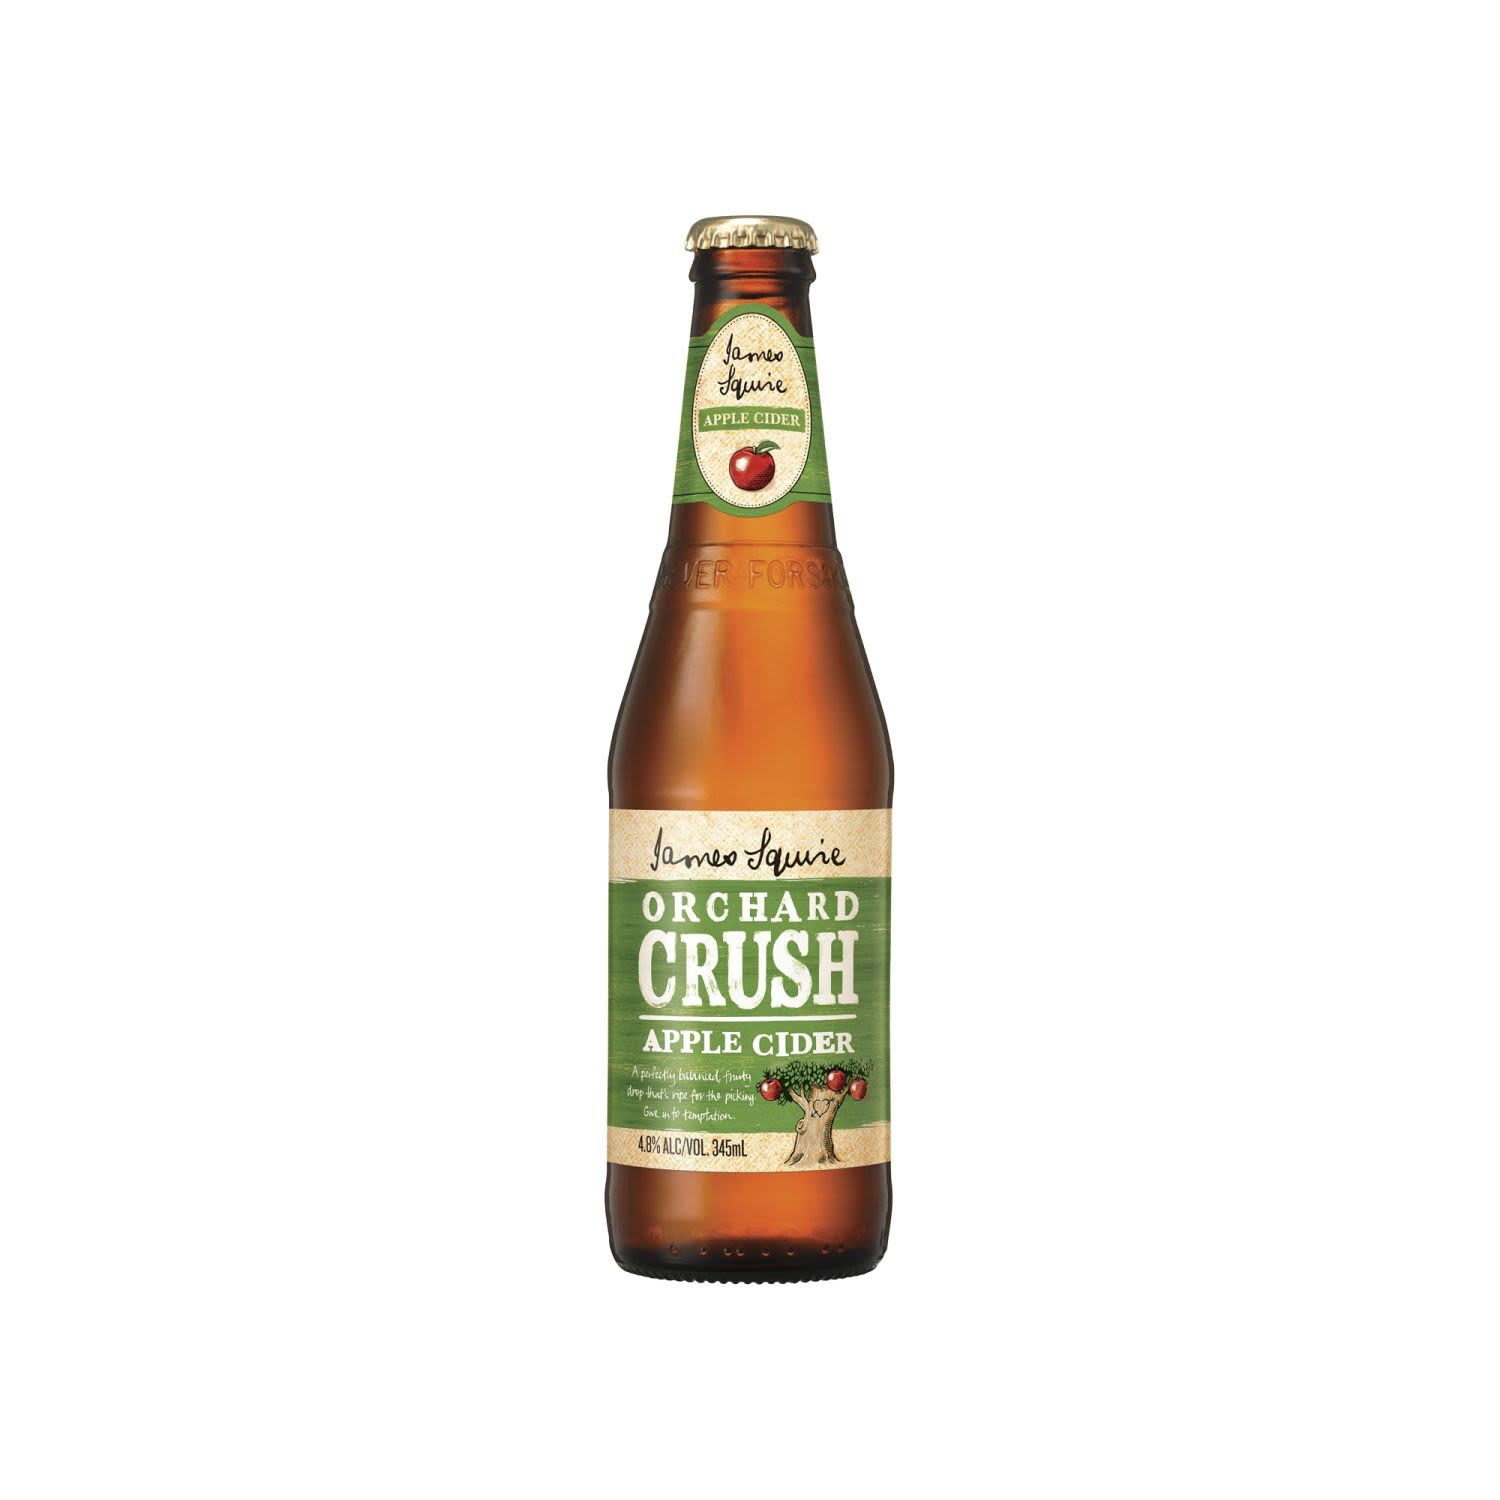 James Squire Orchard Crush Apple Cider 345mL Bottle